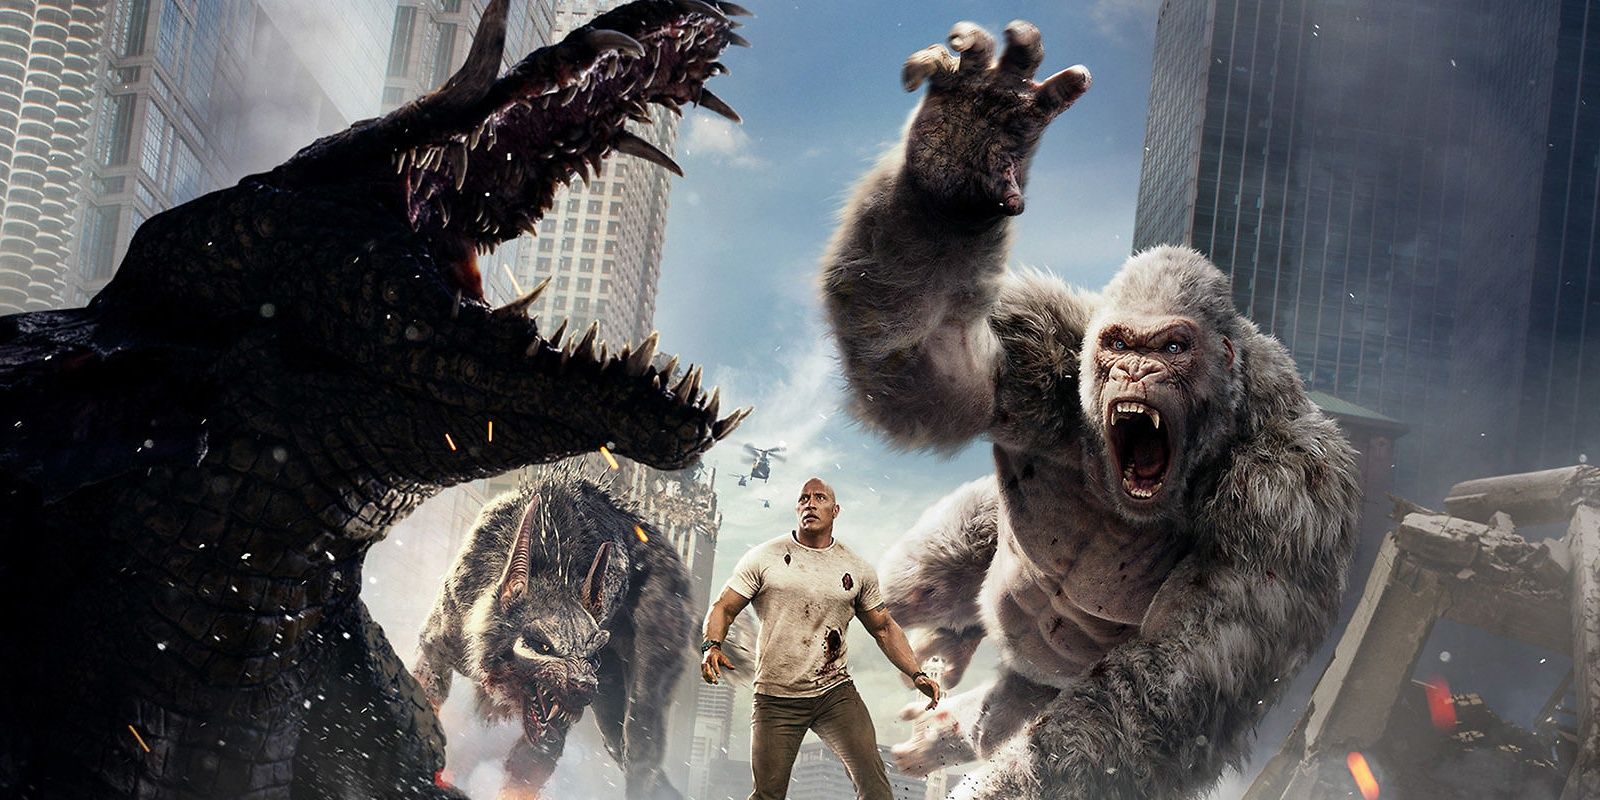 George reaches for another mutant animal in Rampage